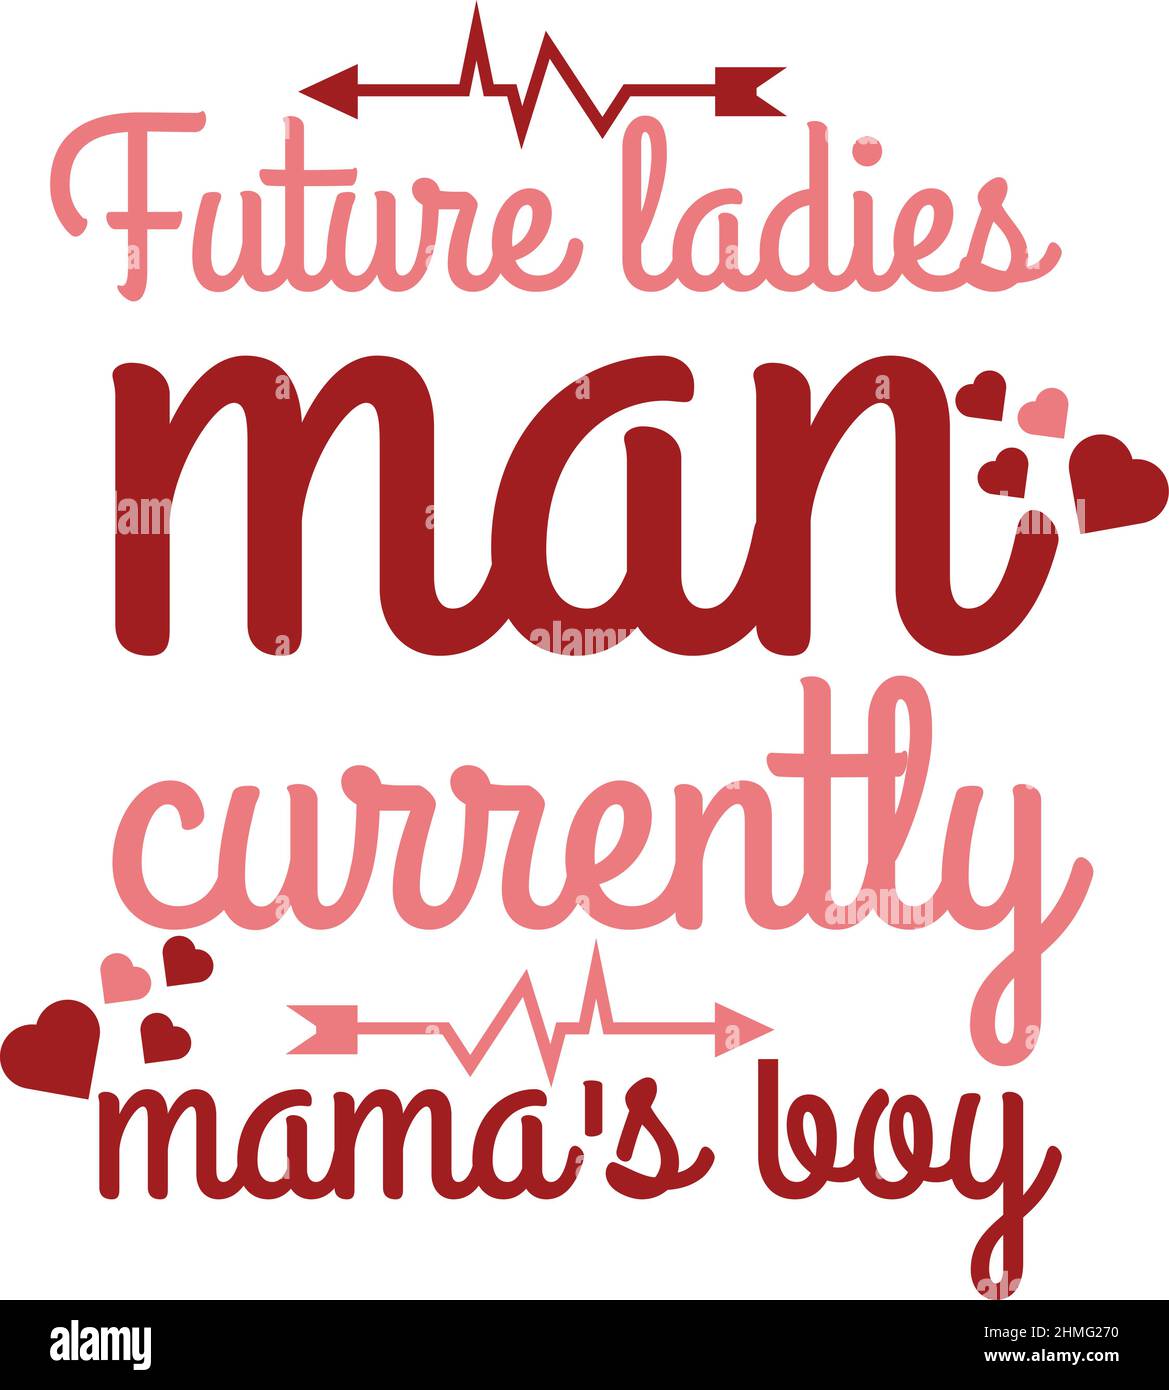 future ladies man currently mama's boy valentine valentines day t shirt monogram text vector template Stock Vector